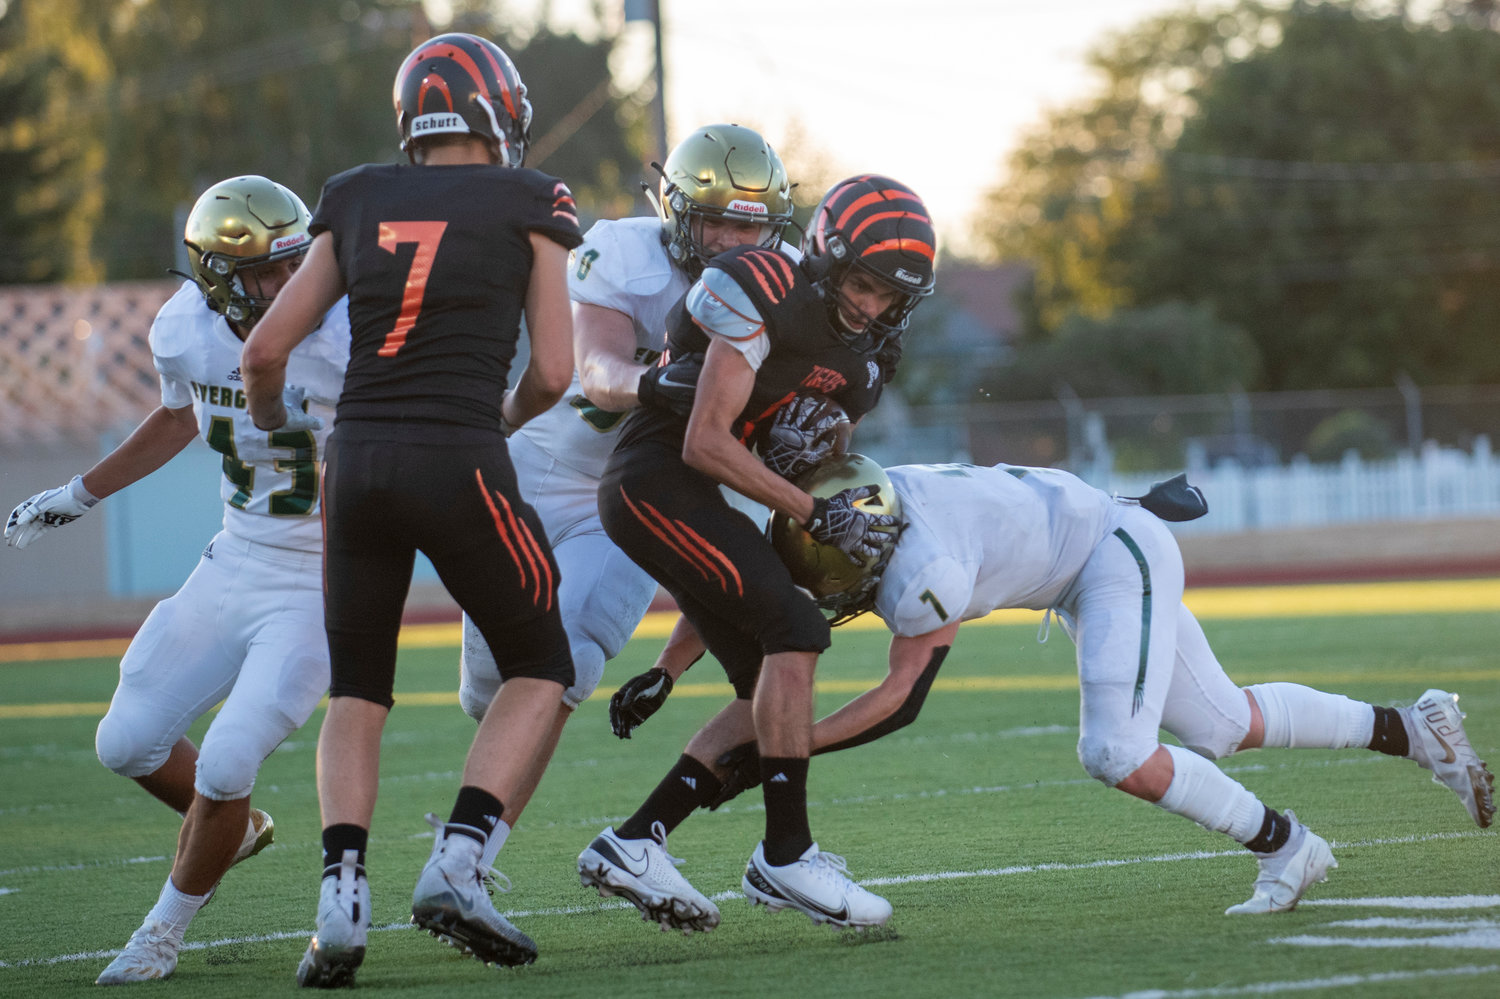 A Centralia ballcarrier is brought down by two Evergreen defenders on Friday, Sept. 3 in Centralia.